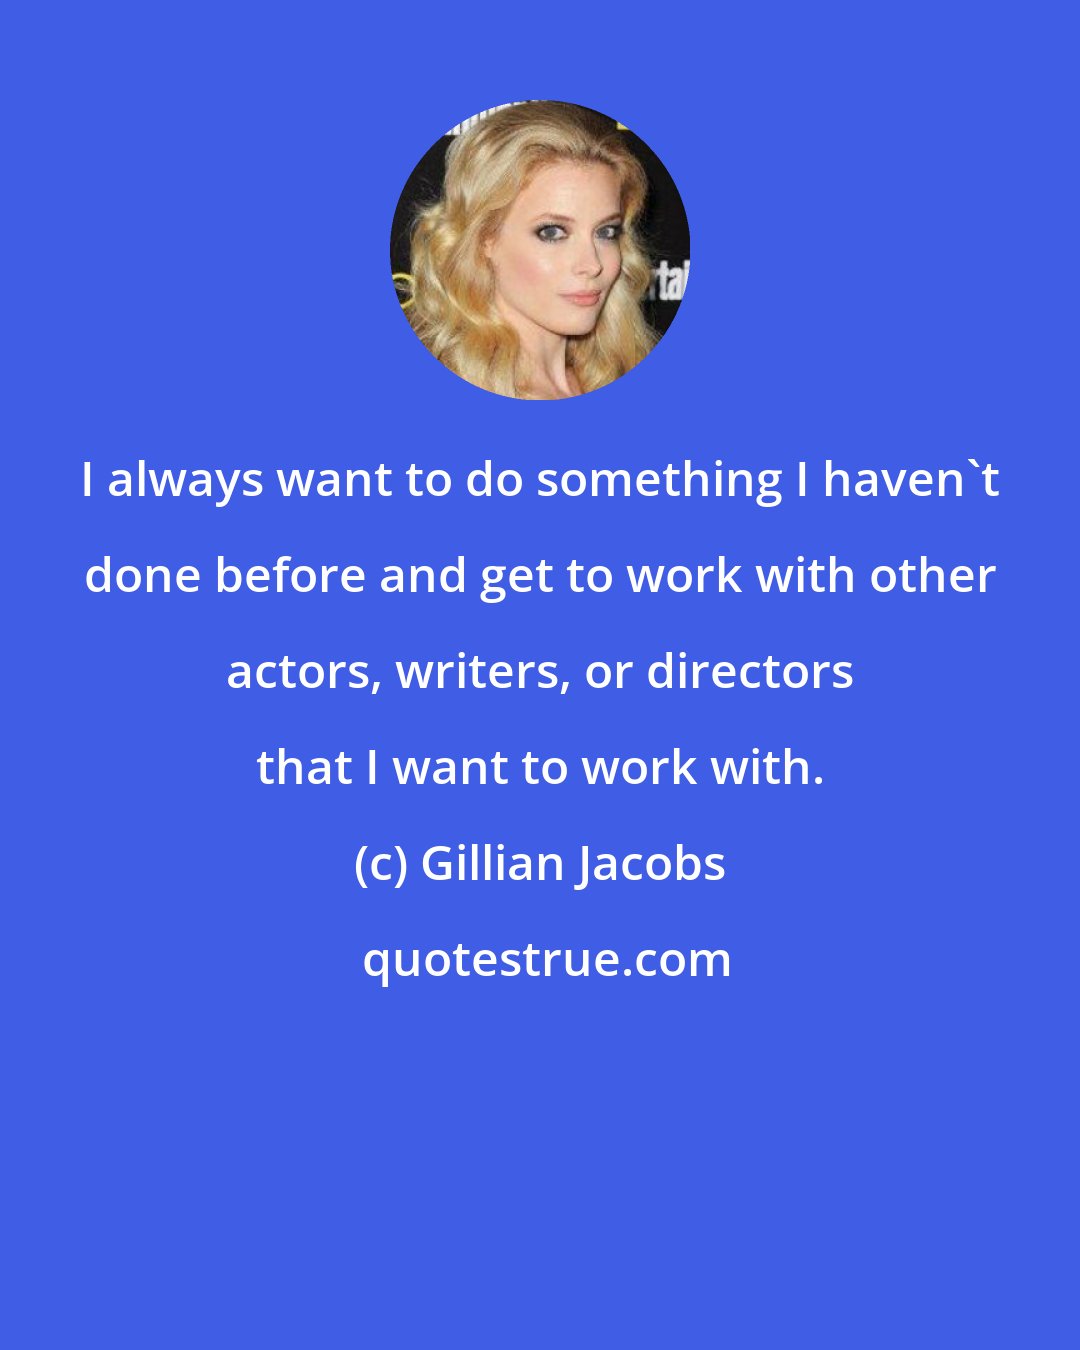 Gillian Jacobs: I always want to do something I haven't done before and get to work with other actors, writers, or directors that I want to work with.